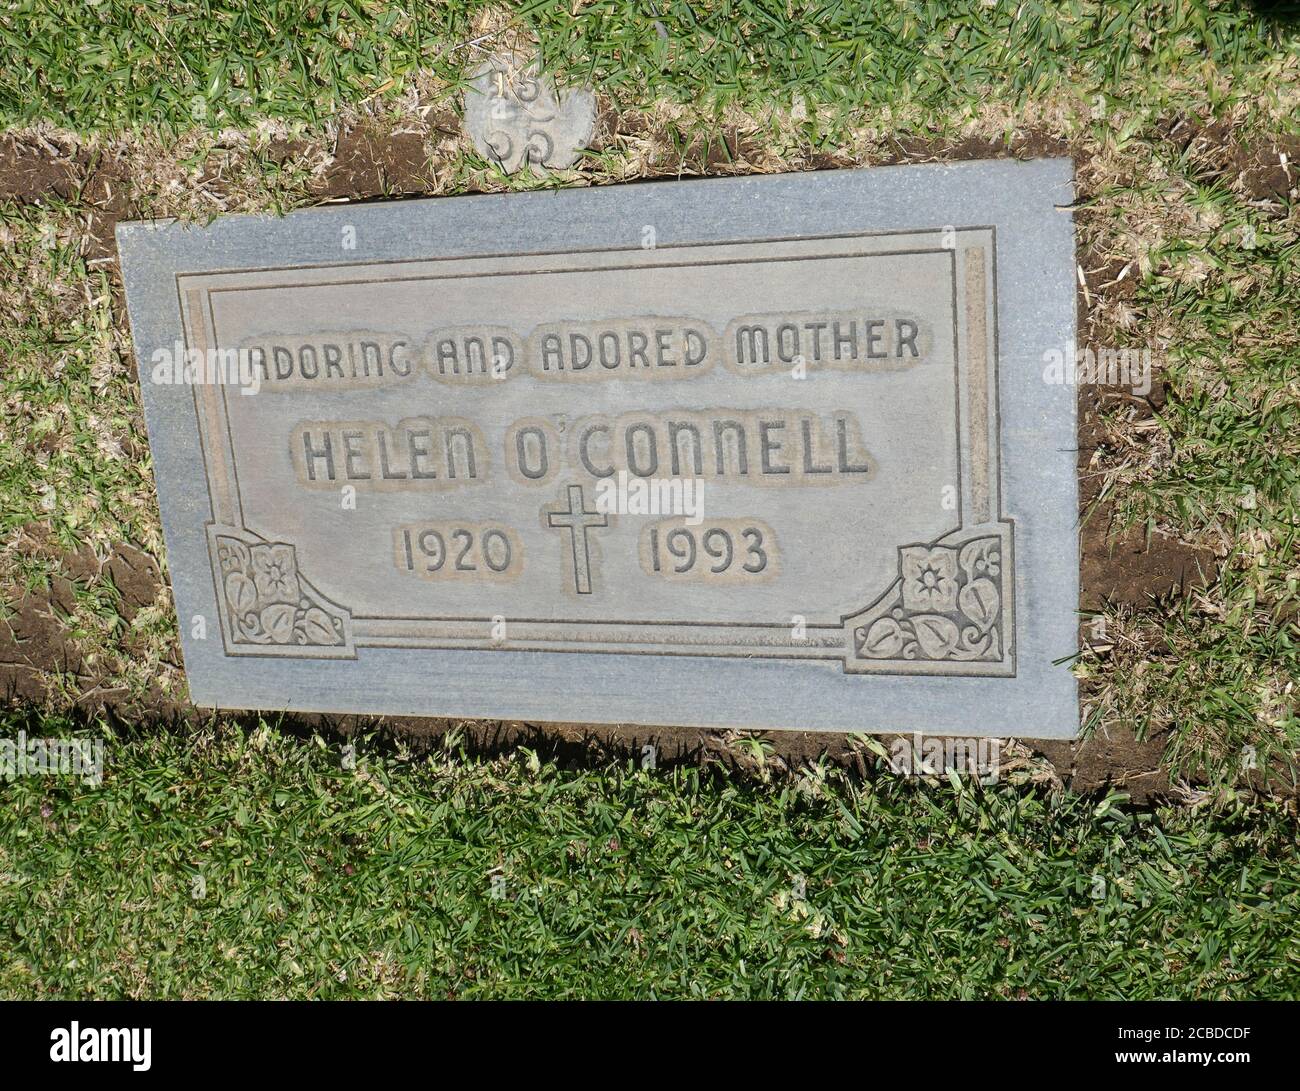 Culver City, California, USA 11th August 2020 A general view of atmosphere of actress/singer Helen O'Connell's Grave at Holy Cross Cemetery on August 11, 2020 in Culver City, California, USA. Photo by Barry King/Alamy Stock Photo Stock Photo